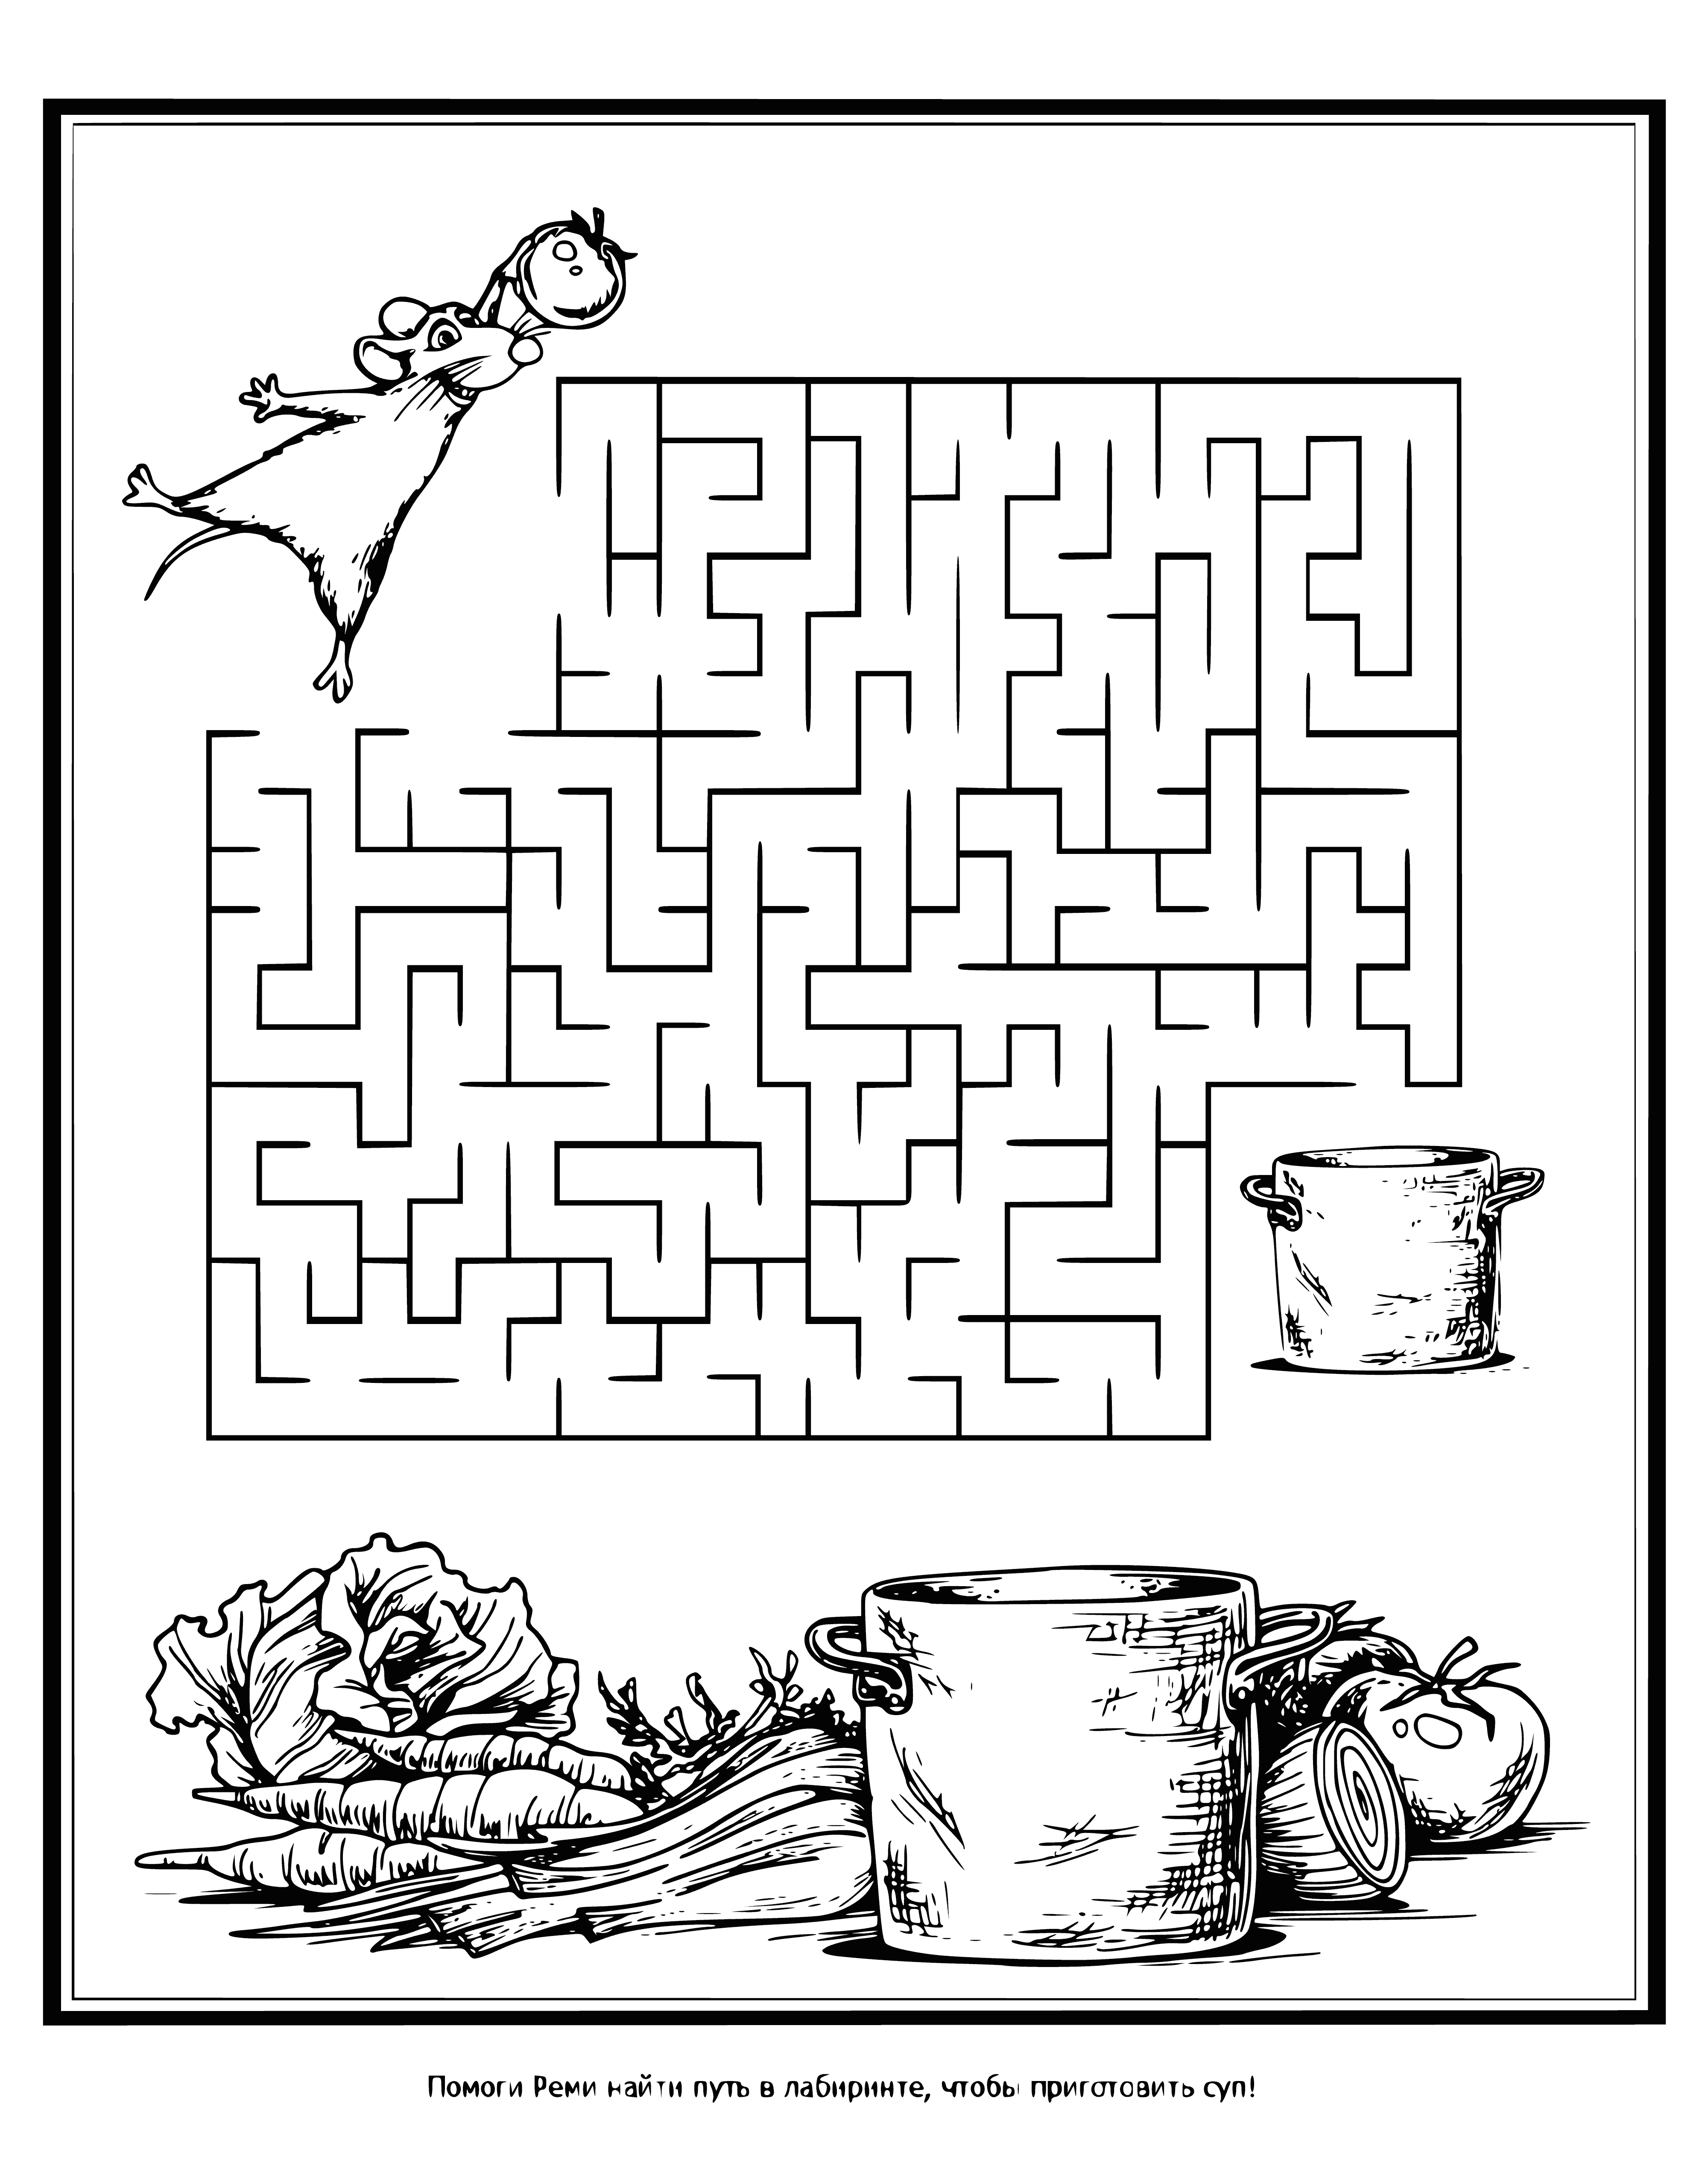 coloring page: Remy, Linguini, and Skinner look concerned around a big dark maze with no exits.